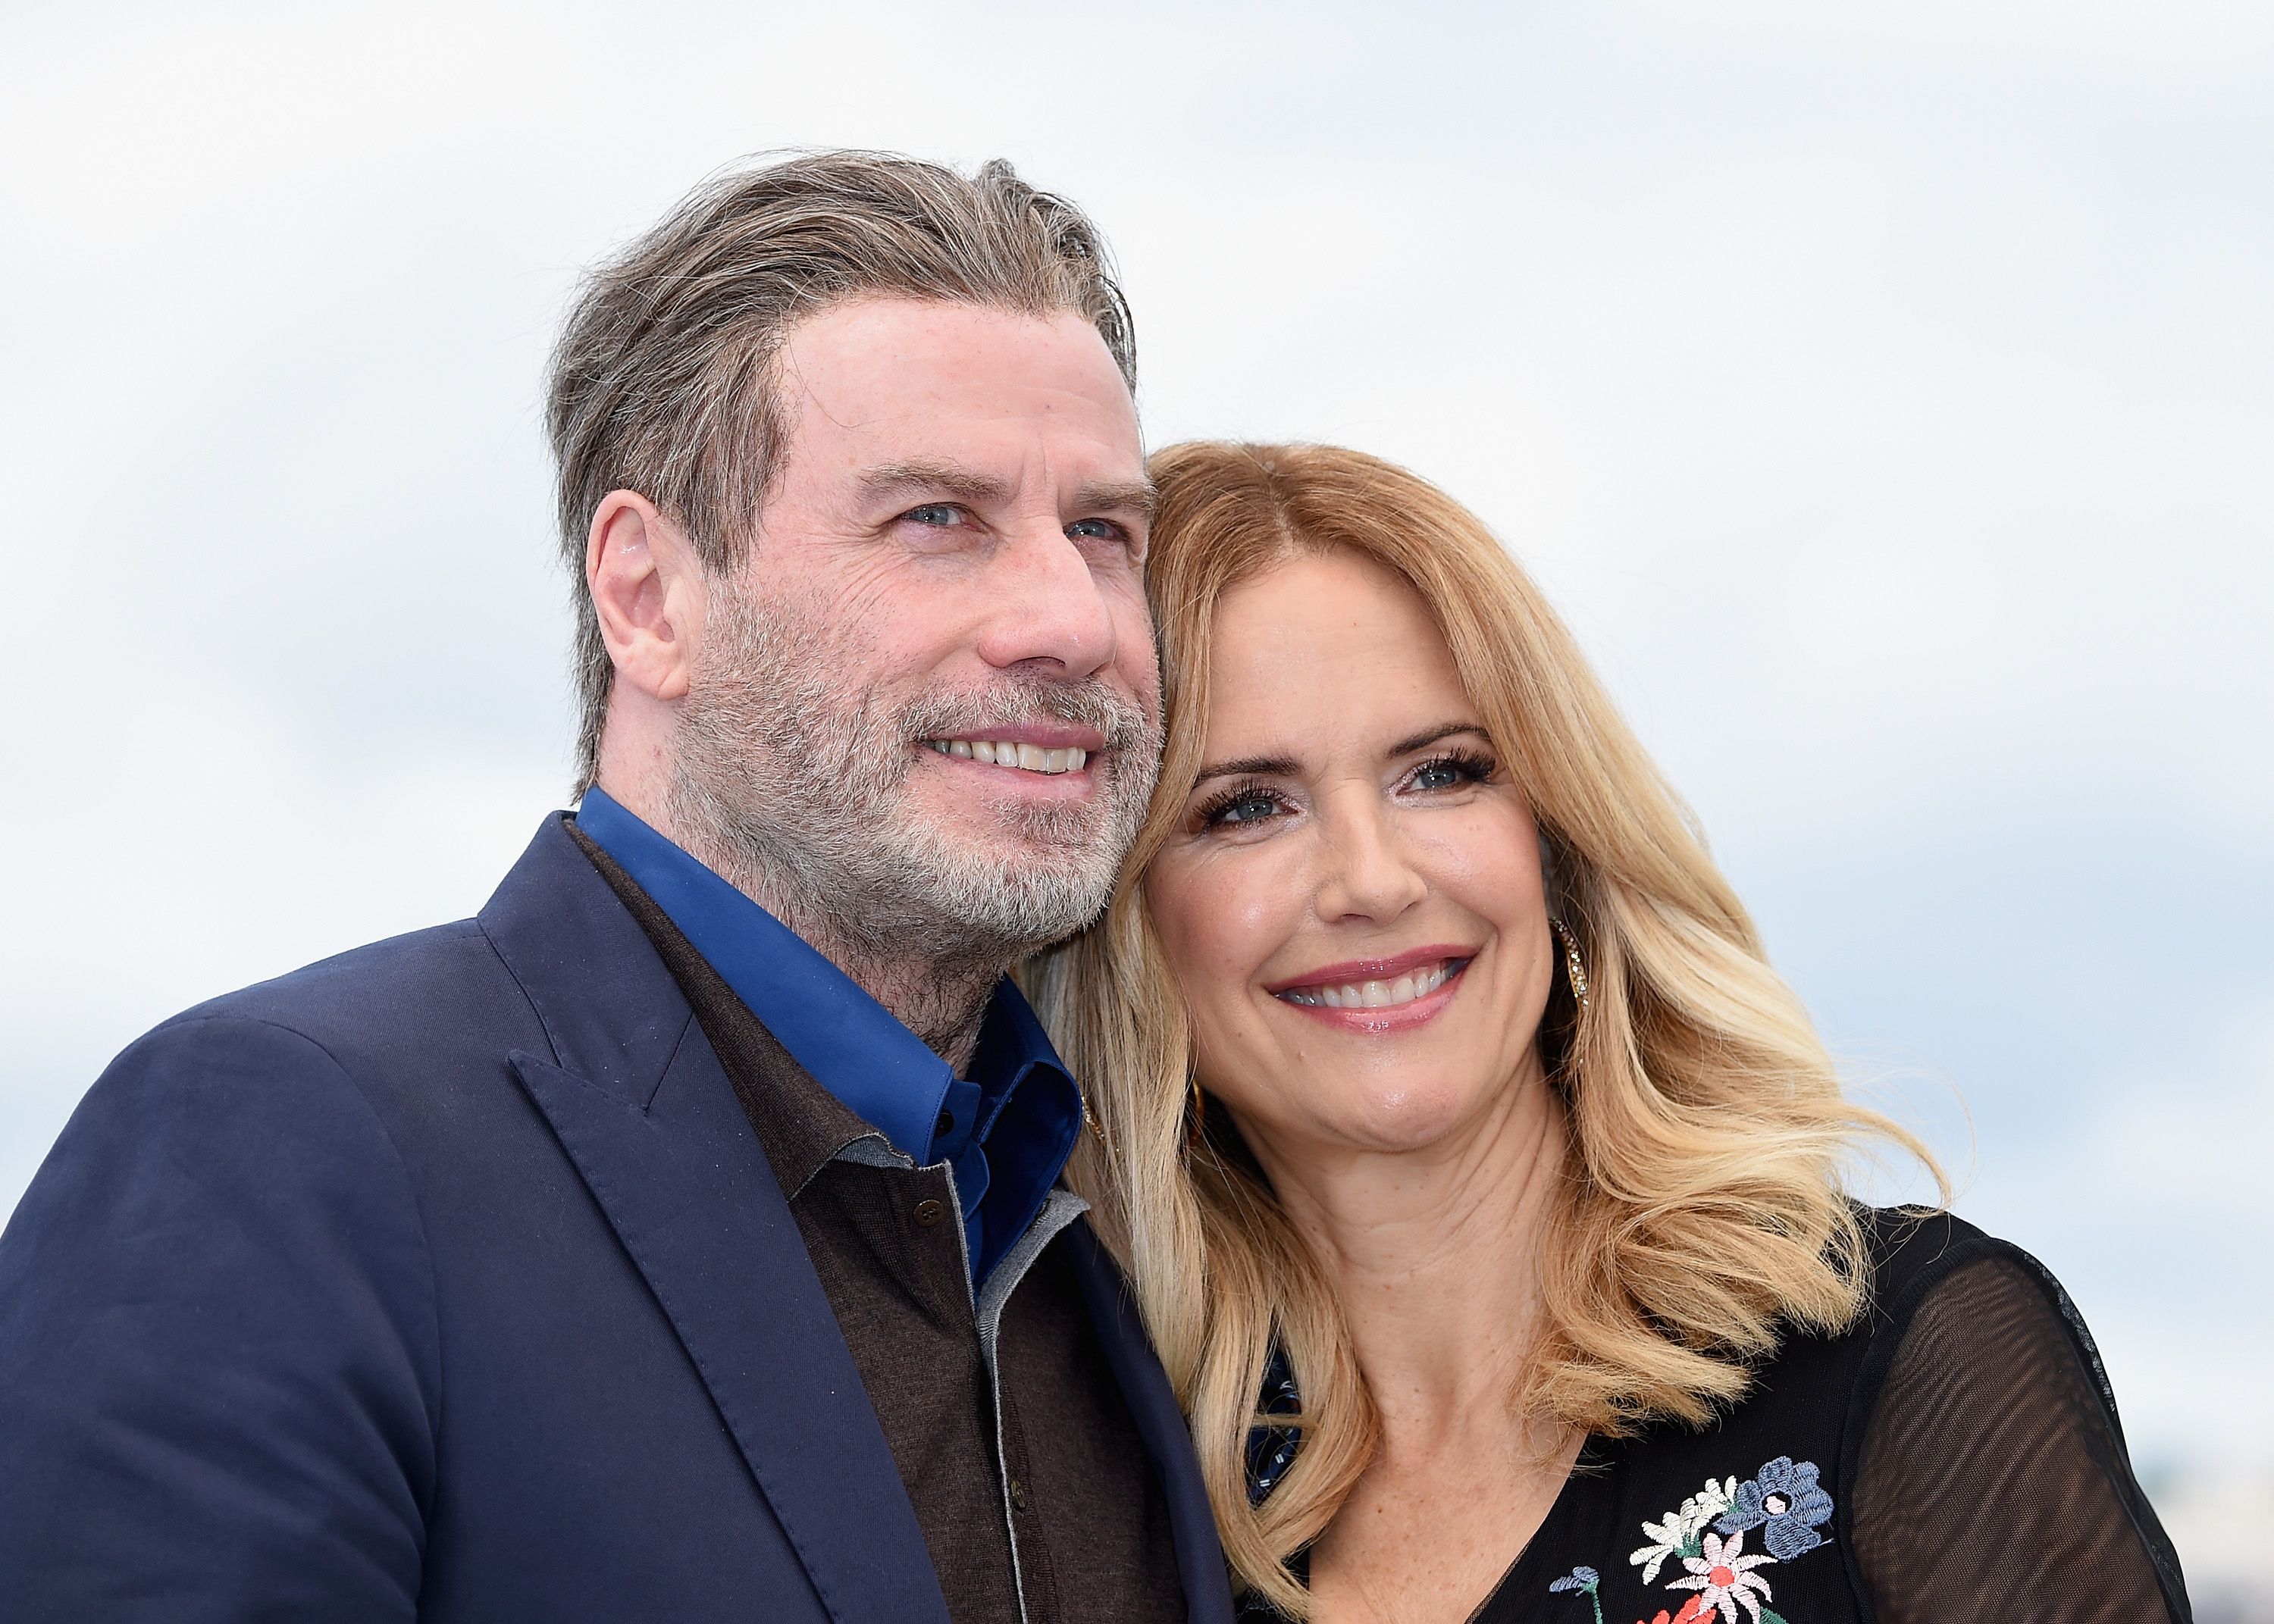  John Travolta and Kelly Preston at the 71st annual Cannes Film Festival in 2018 | Source: Getty Images